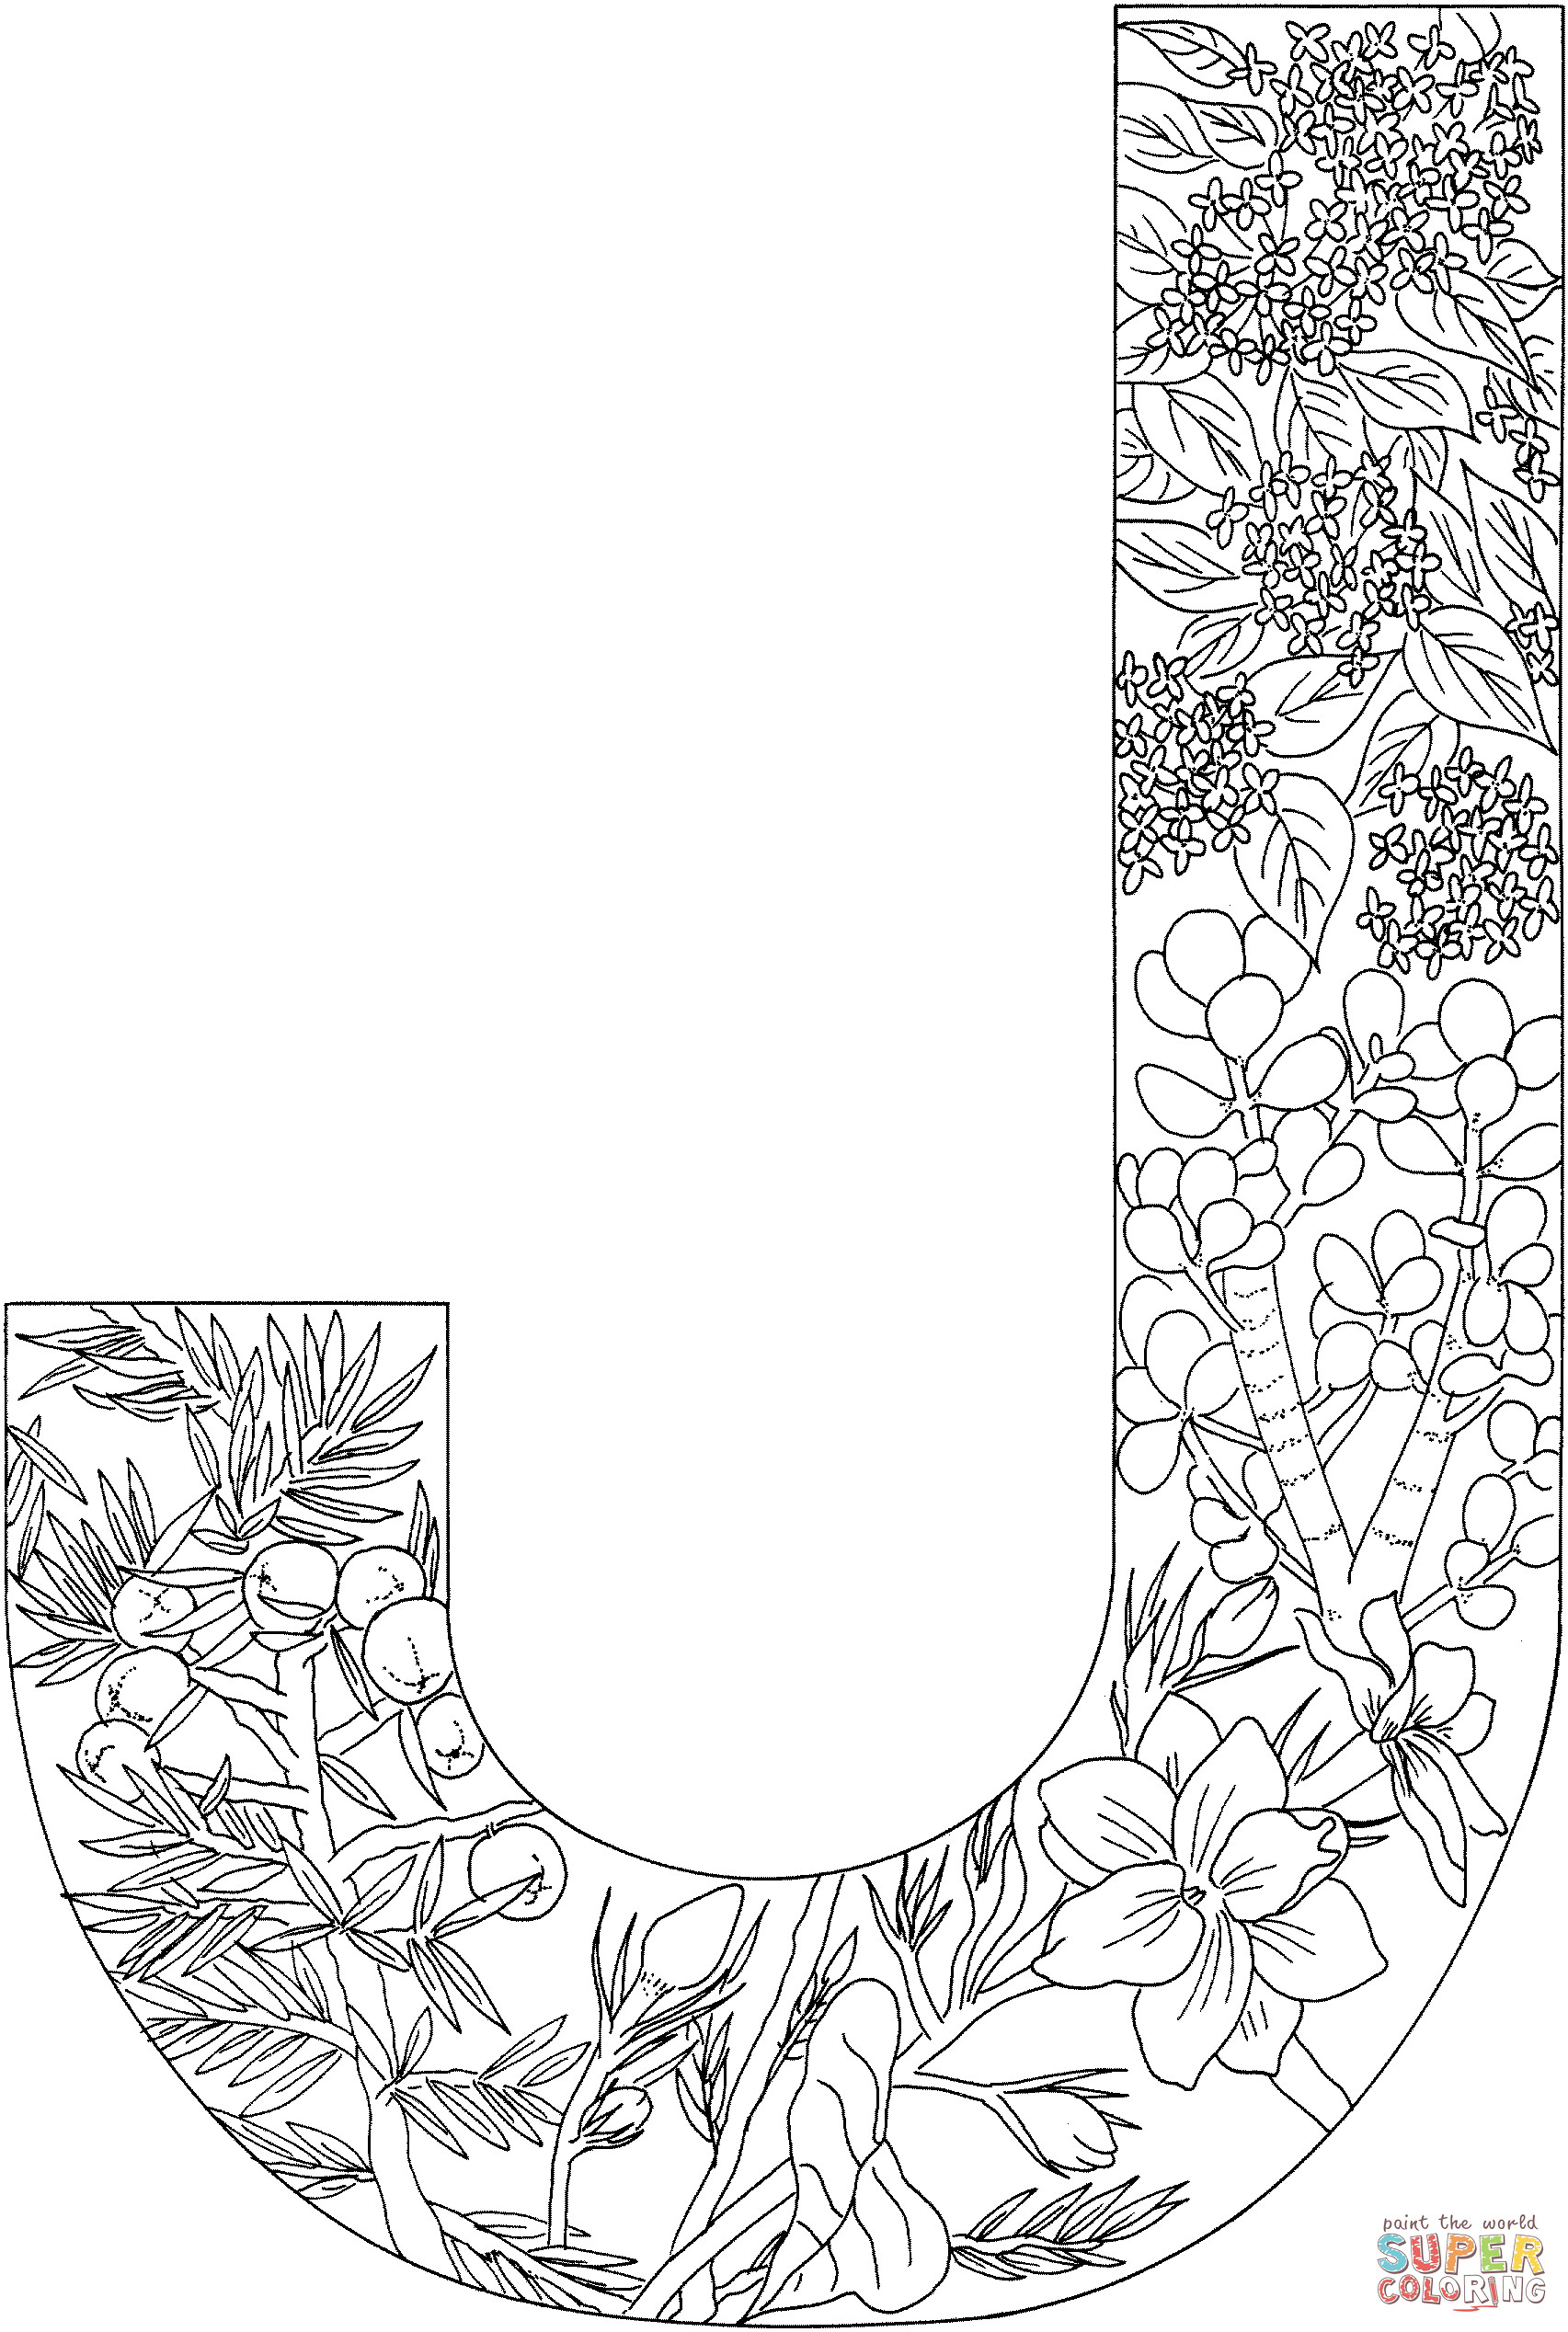 Coloring Sheets For Girls Letter L
 Letter J with Plants coloring page